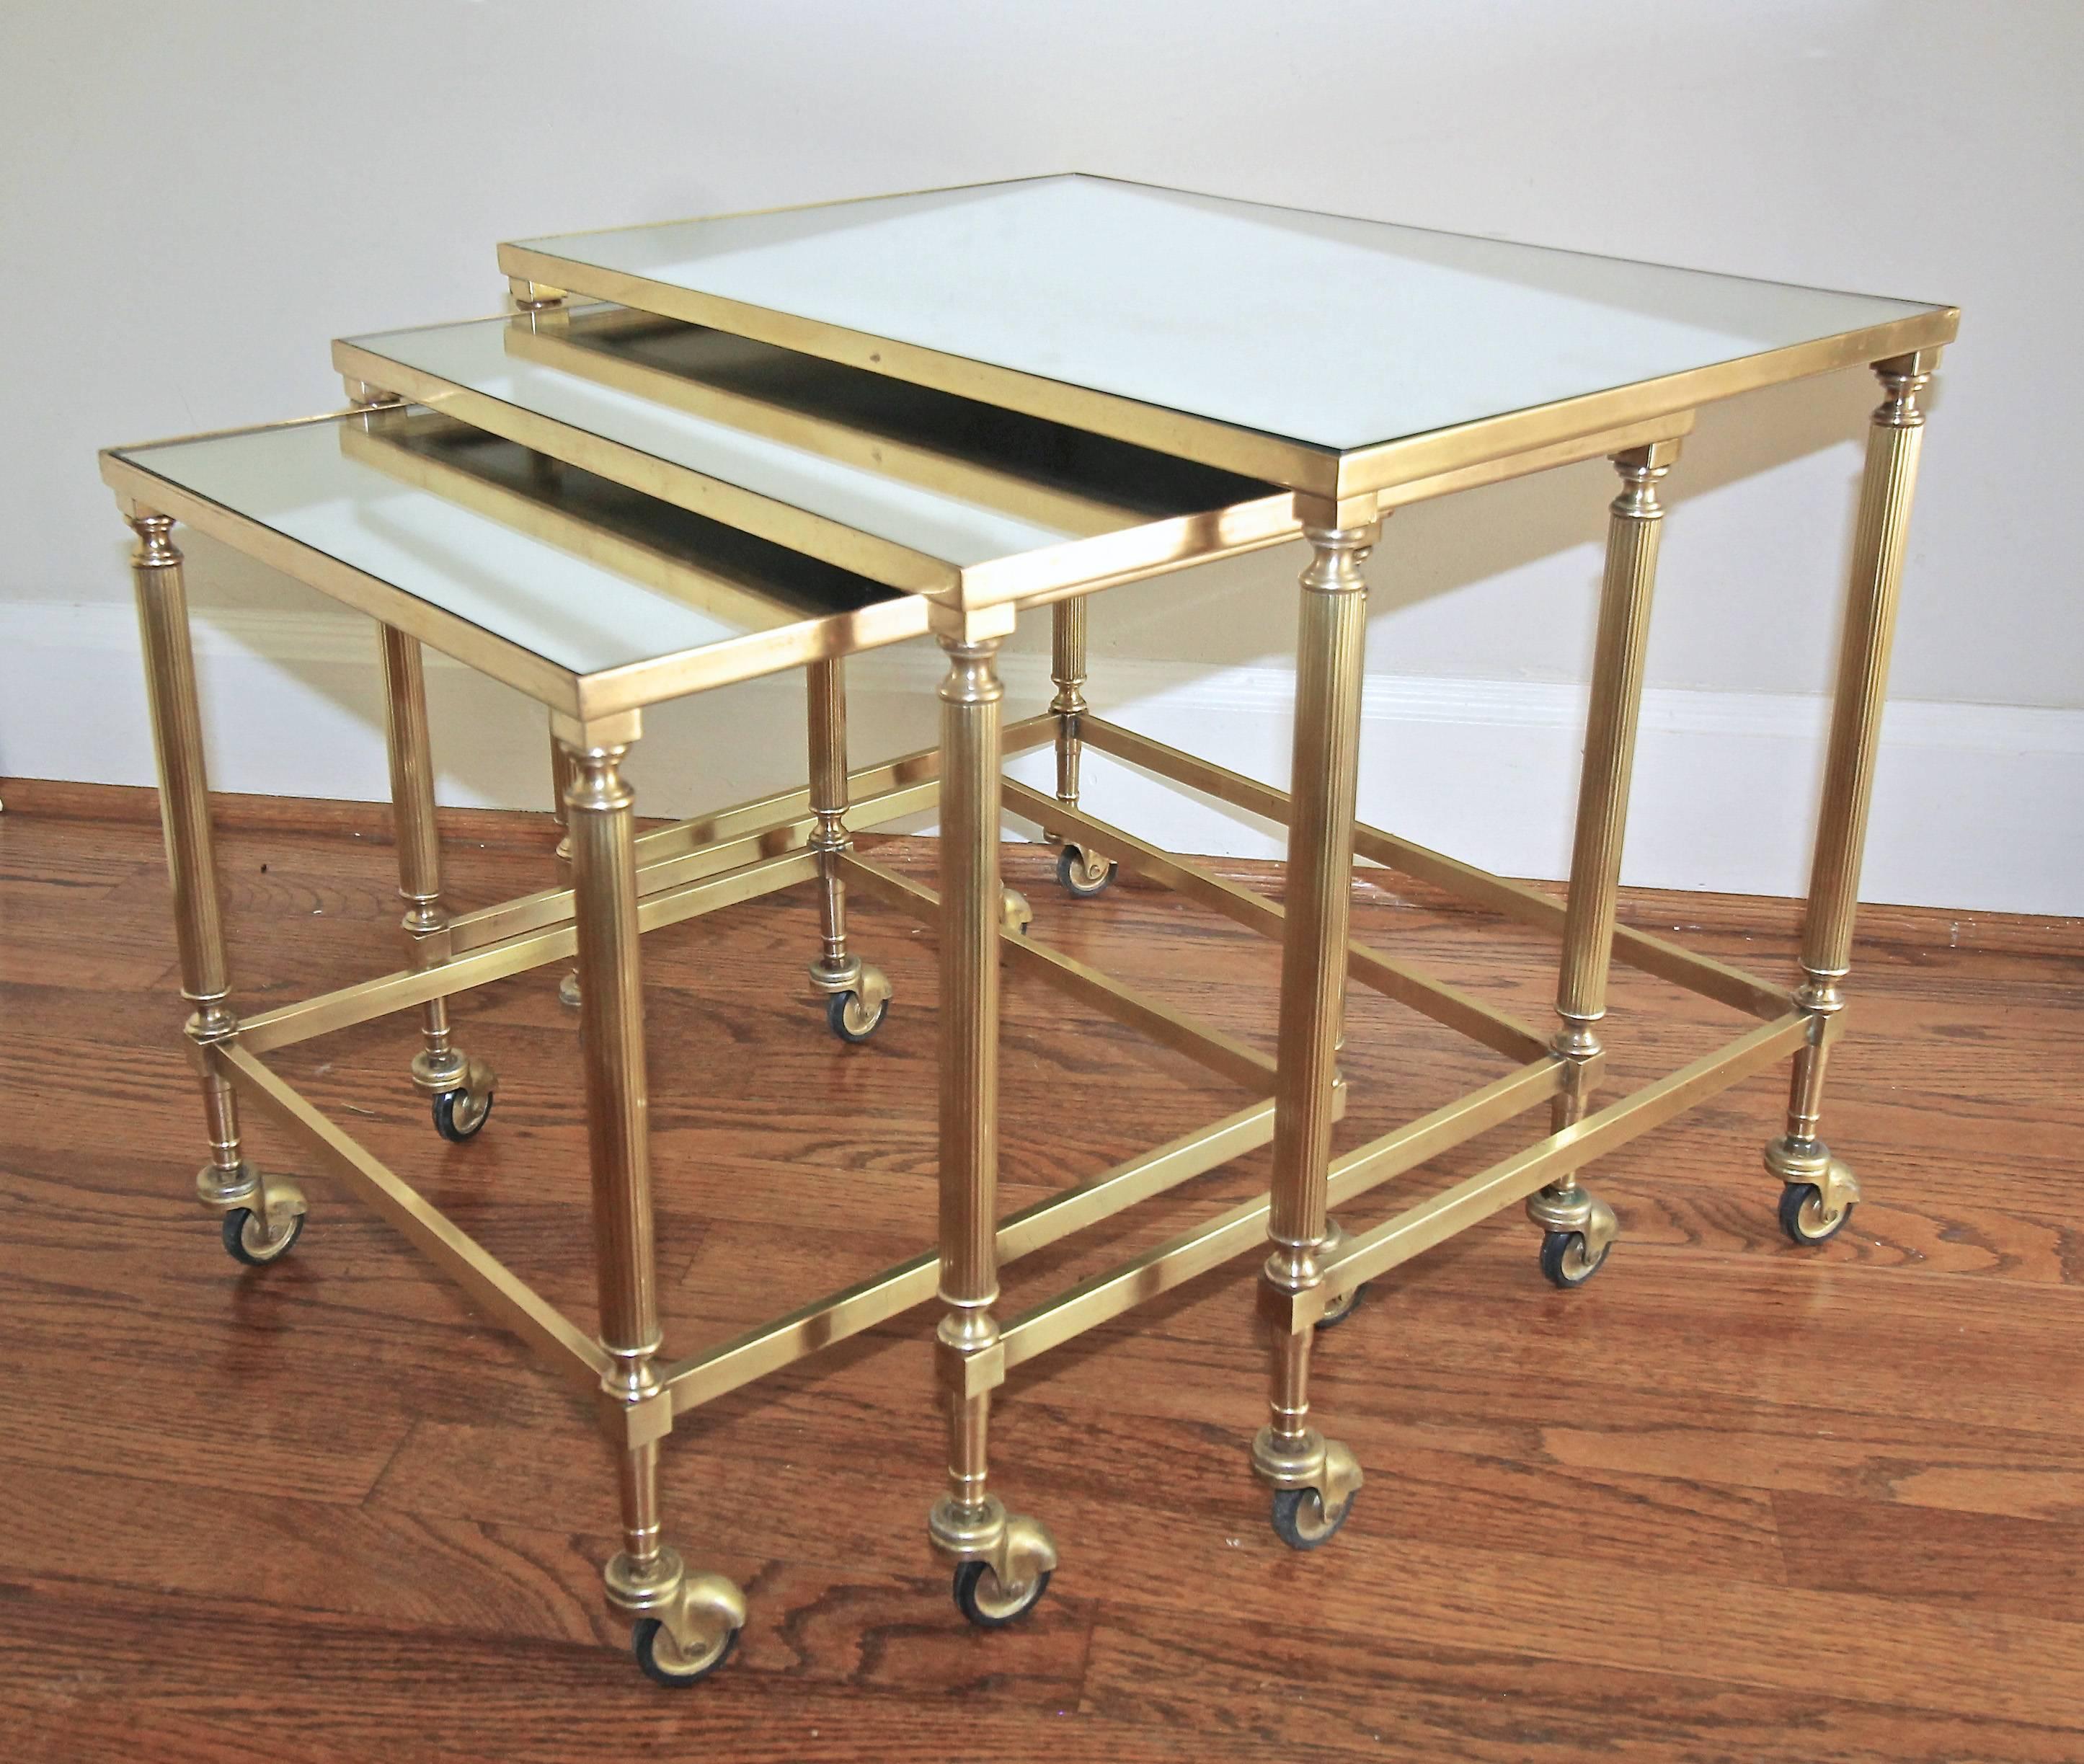 A lovely set of three French brass nesting tables with inset mirrored top. Reeded brass legs are set upon capped casters. 
Size each table:
1) 20.5